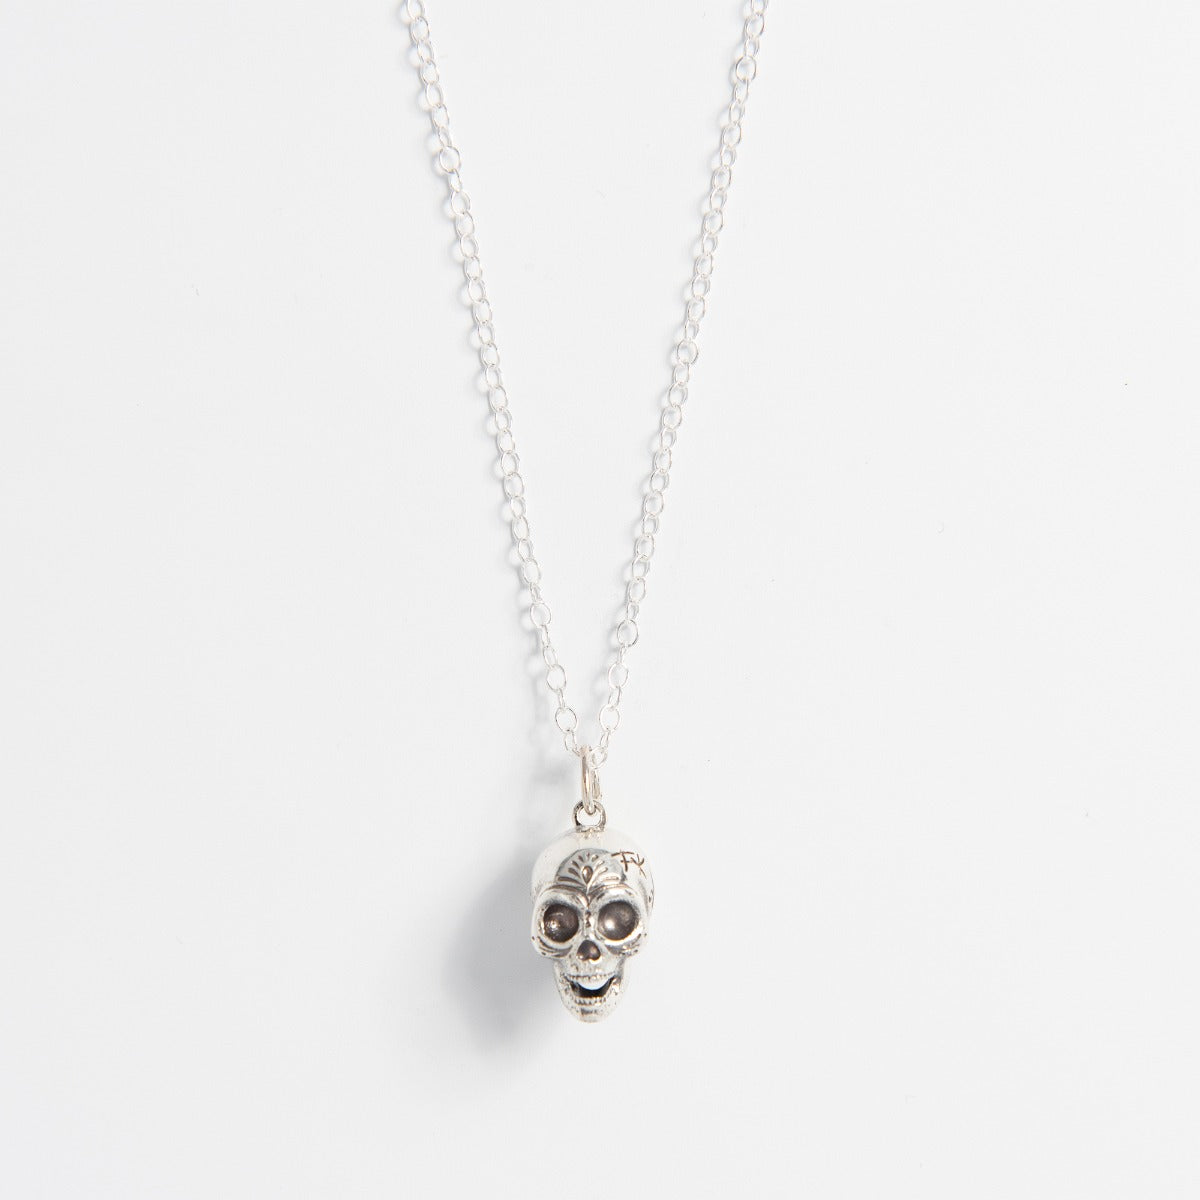 Frida Kahlo Skull Necklace Sterling Silver By Licensed To Charm